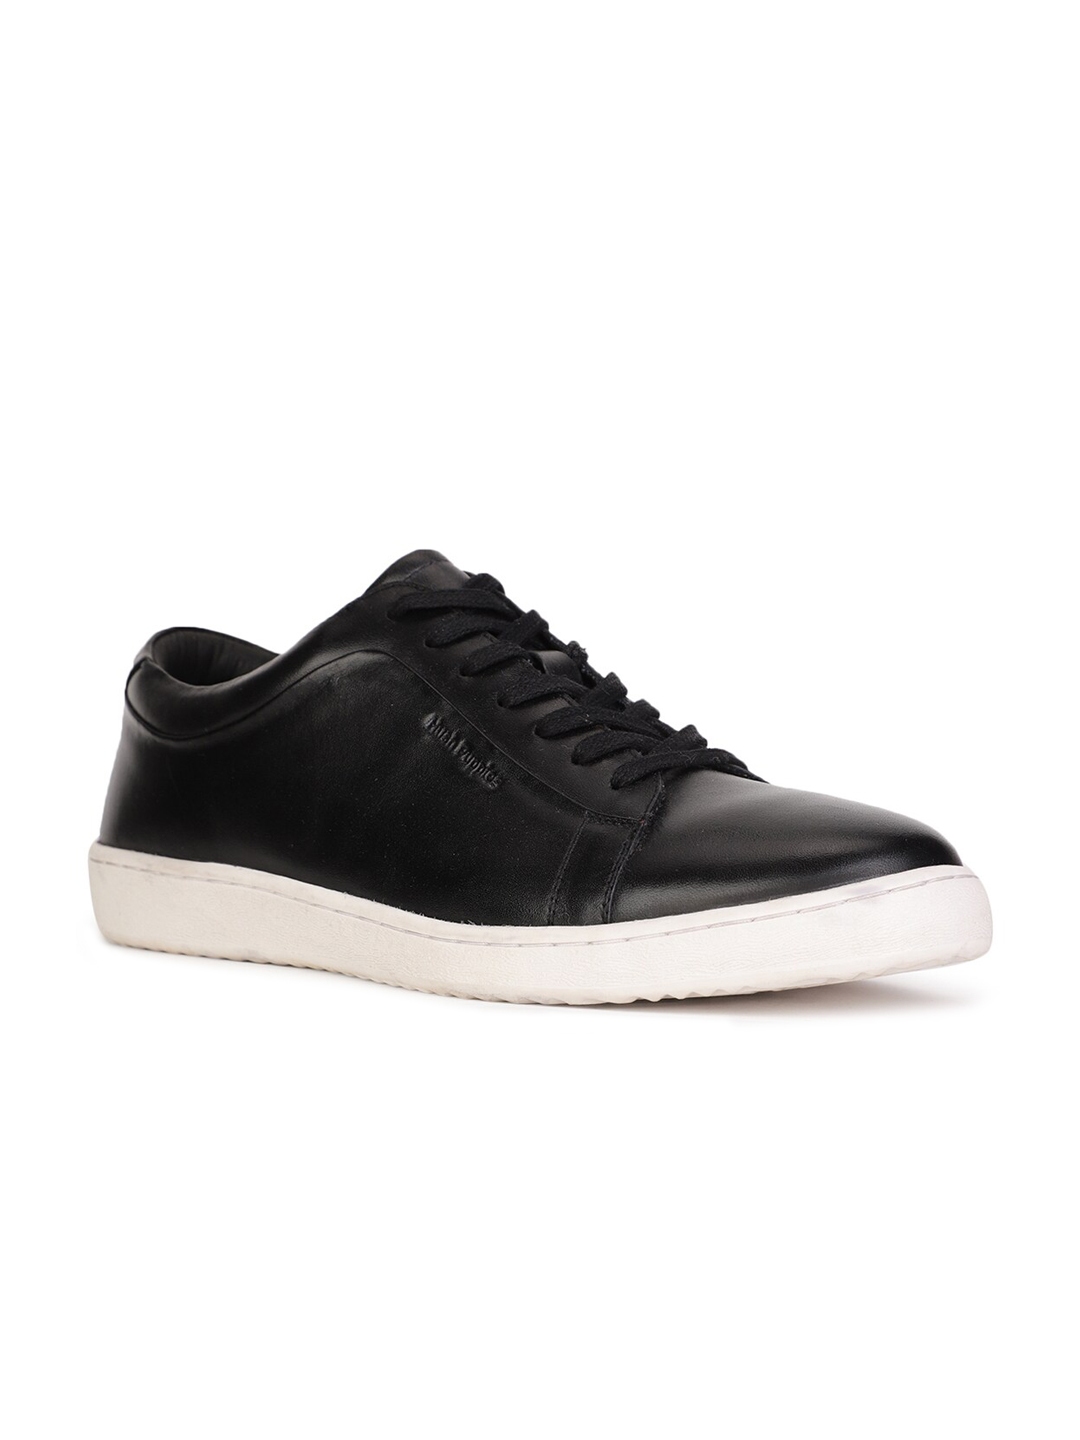 Buy Hush Puppies Men Black Leather Sneakers - Casual Shoes for Men ...